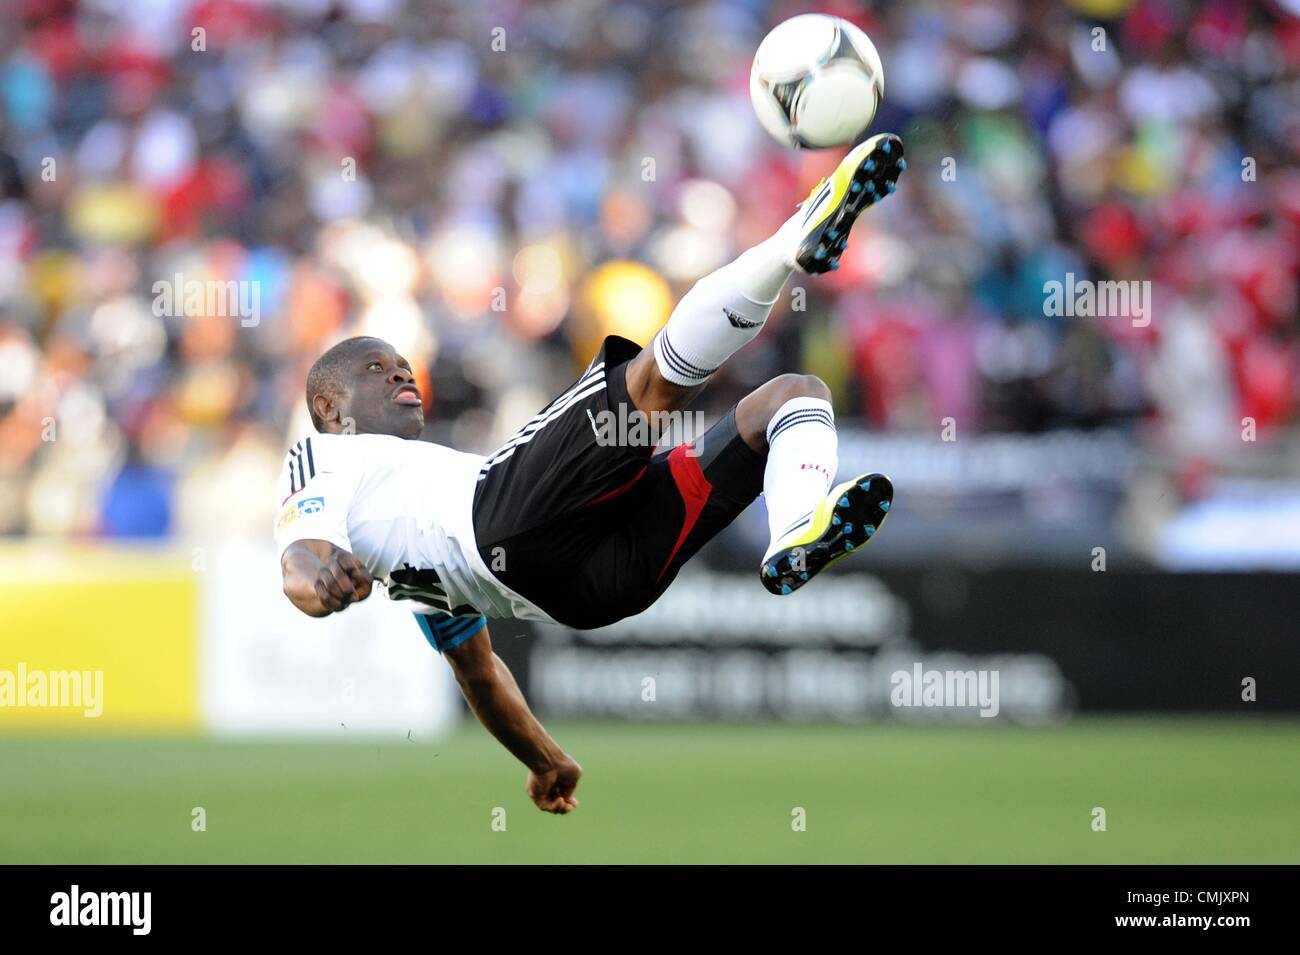 POLOKWANE, SOUTH AFRICA - AUGUST 19, Lucky Lekgwathi during the MTN 8 1st leg semi final match between SuperSport United and Orlando Pirates at Peter Mokaba Stadium on August 19, 2012 in Polokwane, South Africa Photo by Lee Warren / Gallo Images Stock Photo